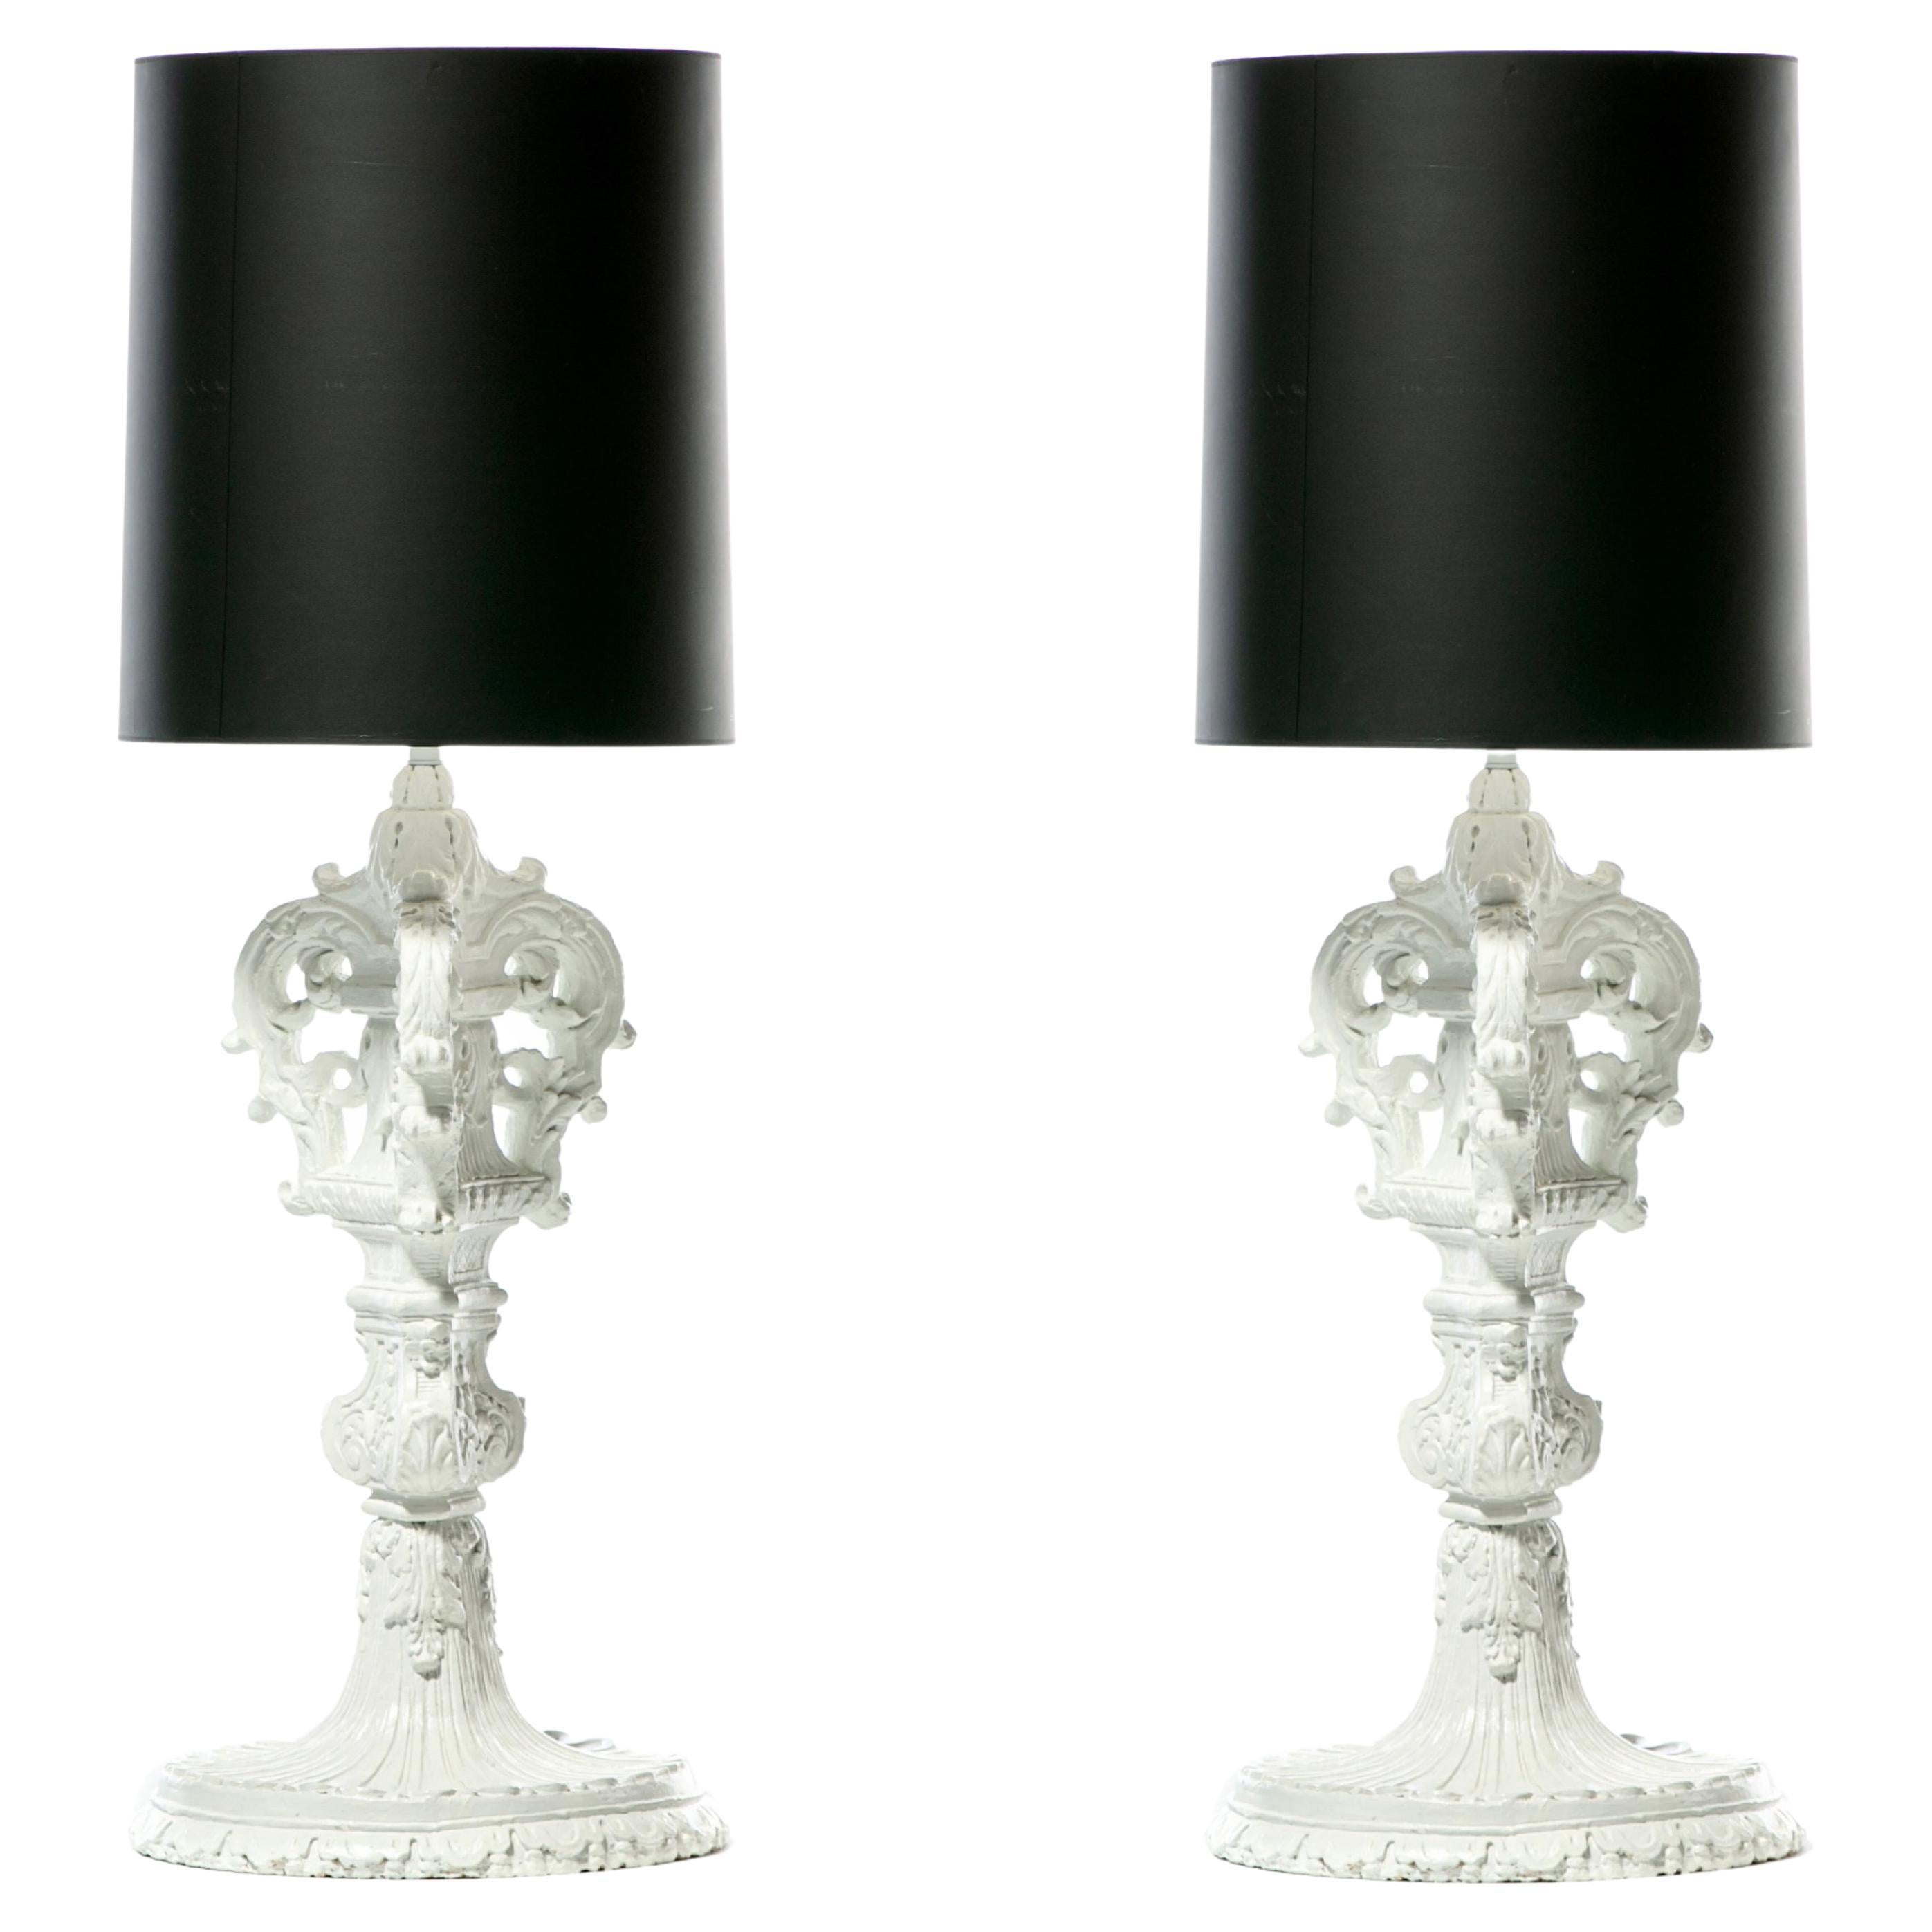 Pair of Large Hollywood Regency Baroque Plaster Lamps by Marge Carson c. 1960s For Sale